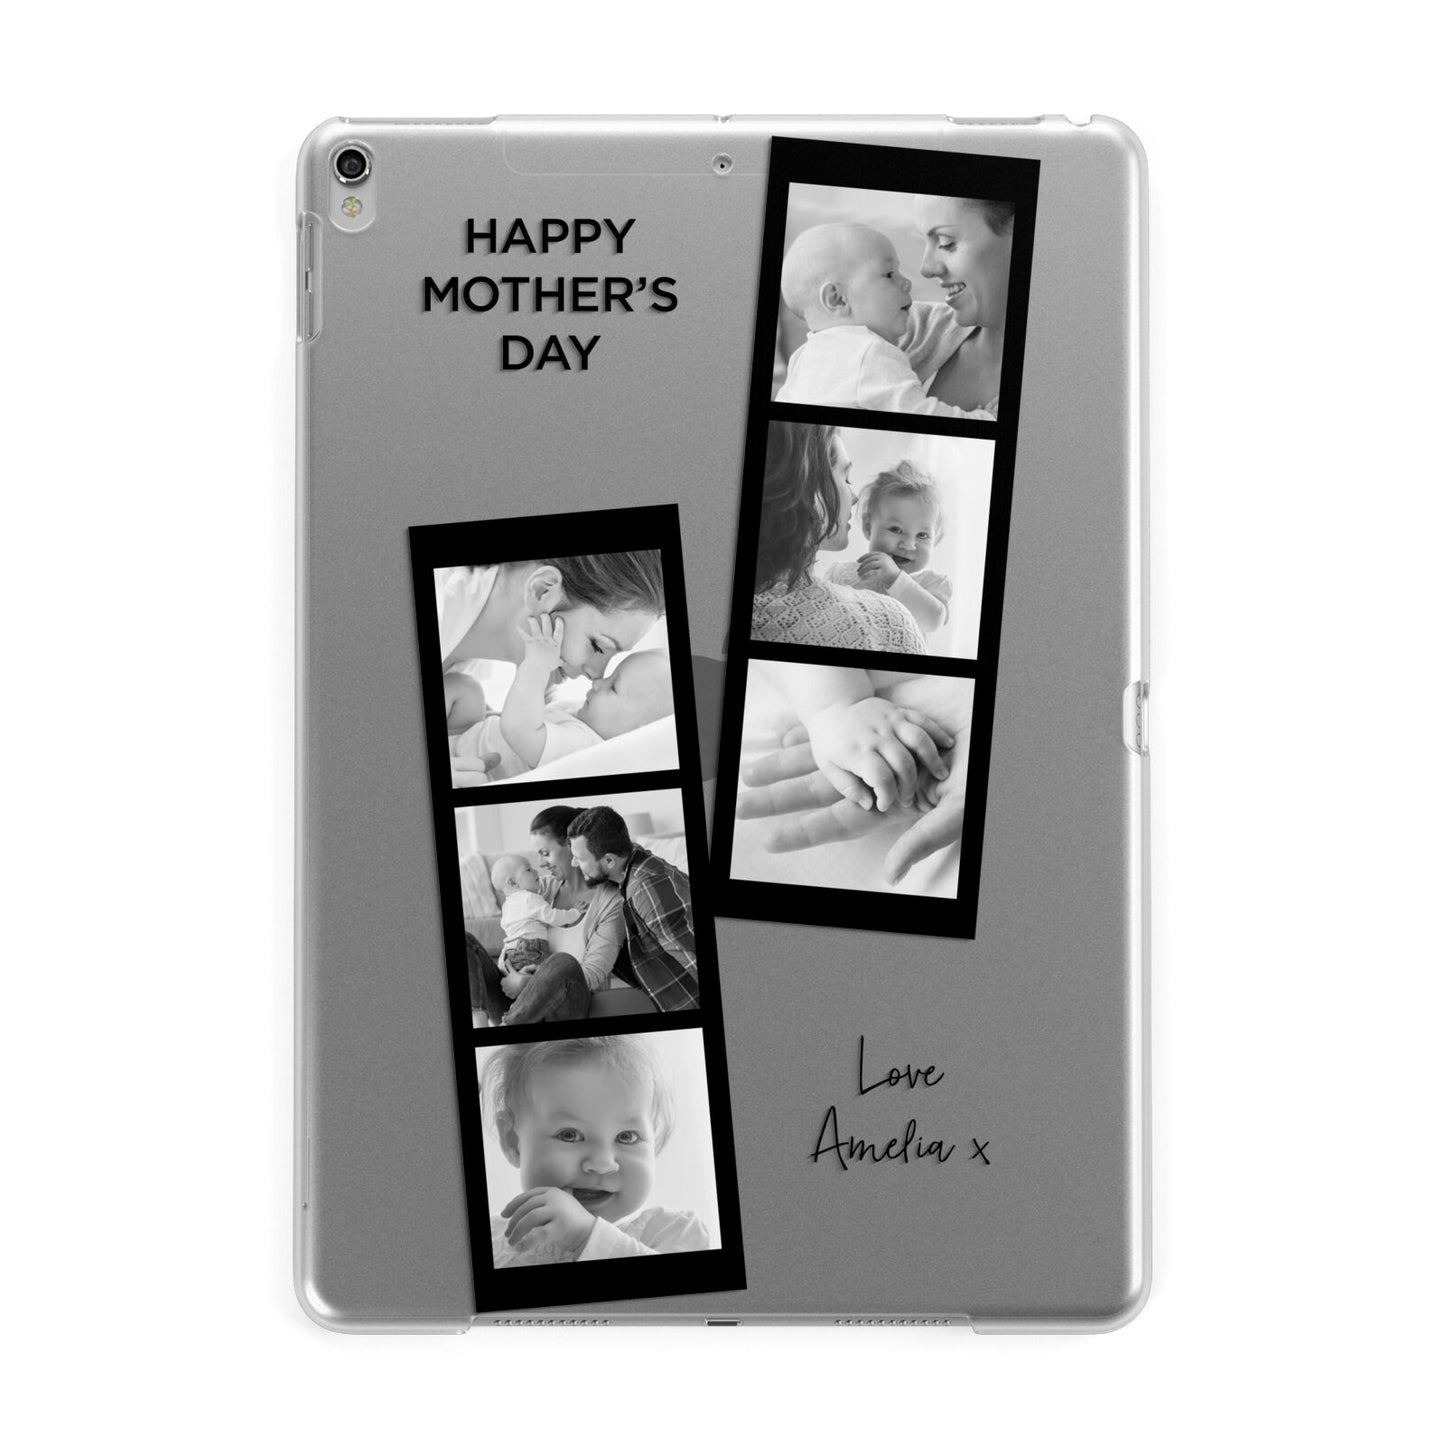 Mothers Day Photo Strip Apple iPad Silver Case